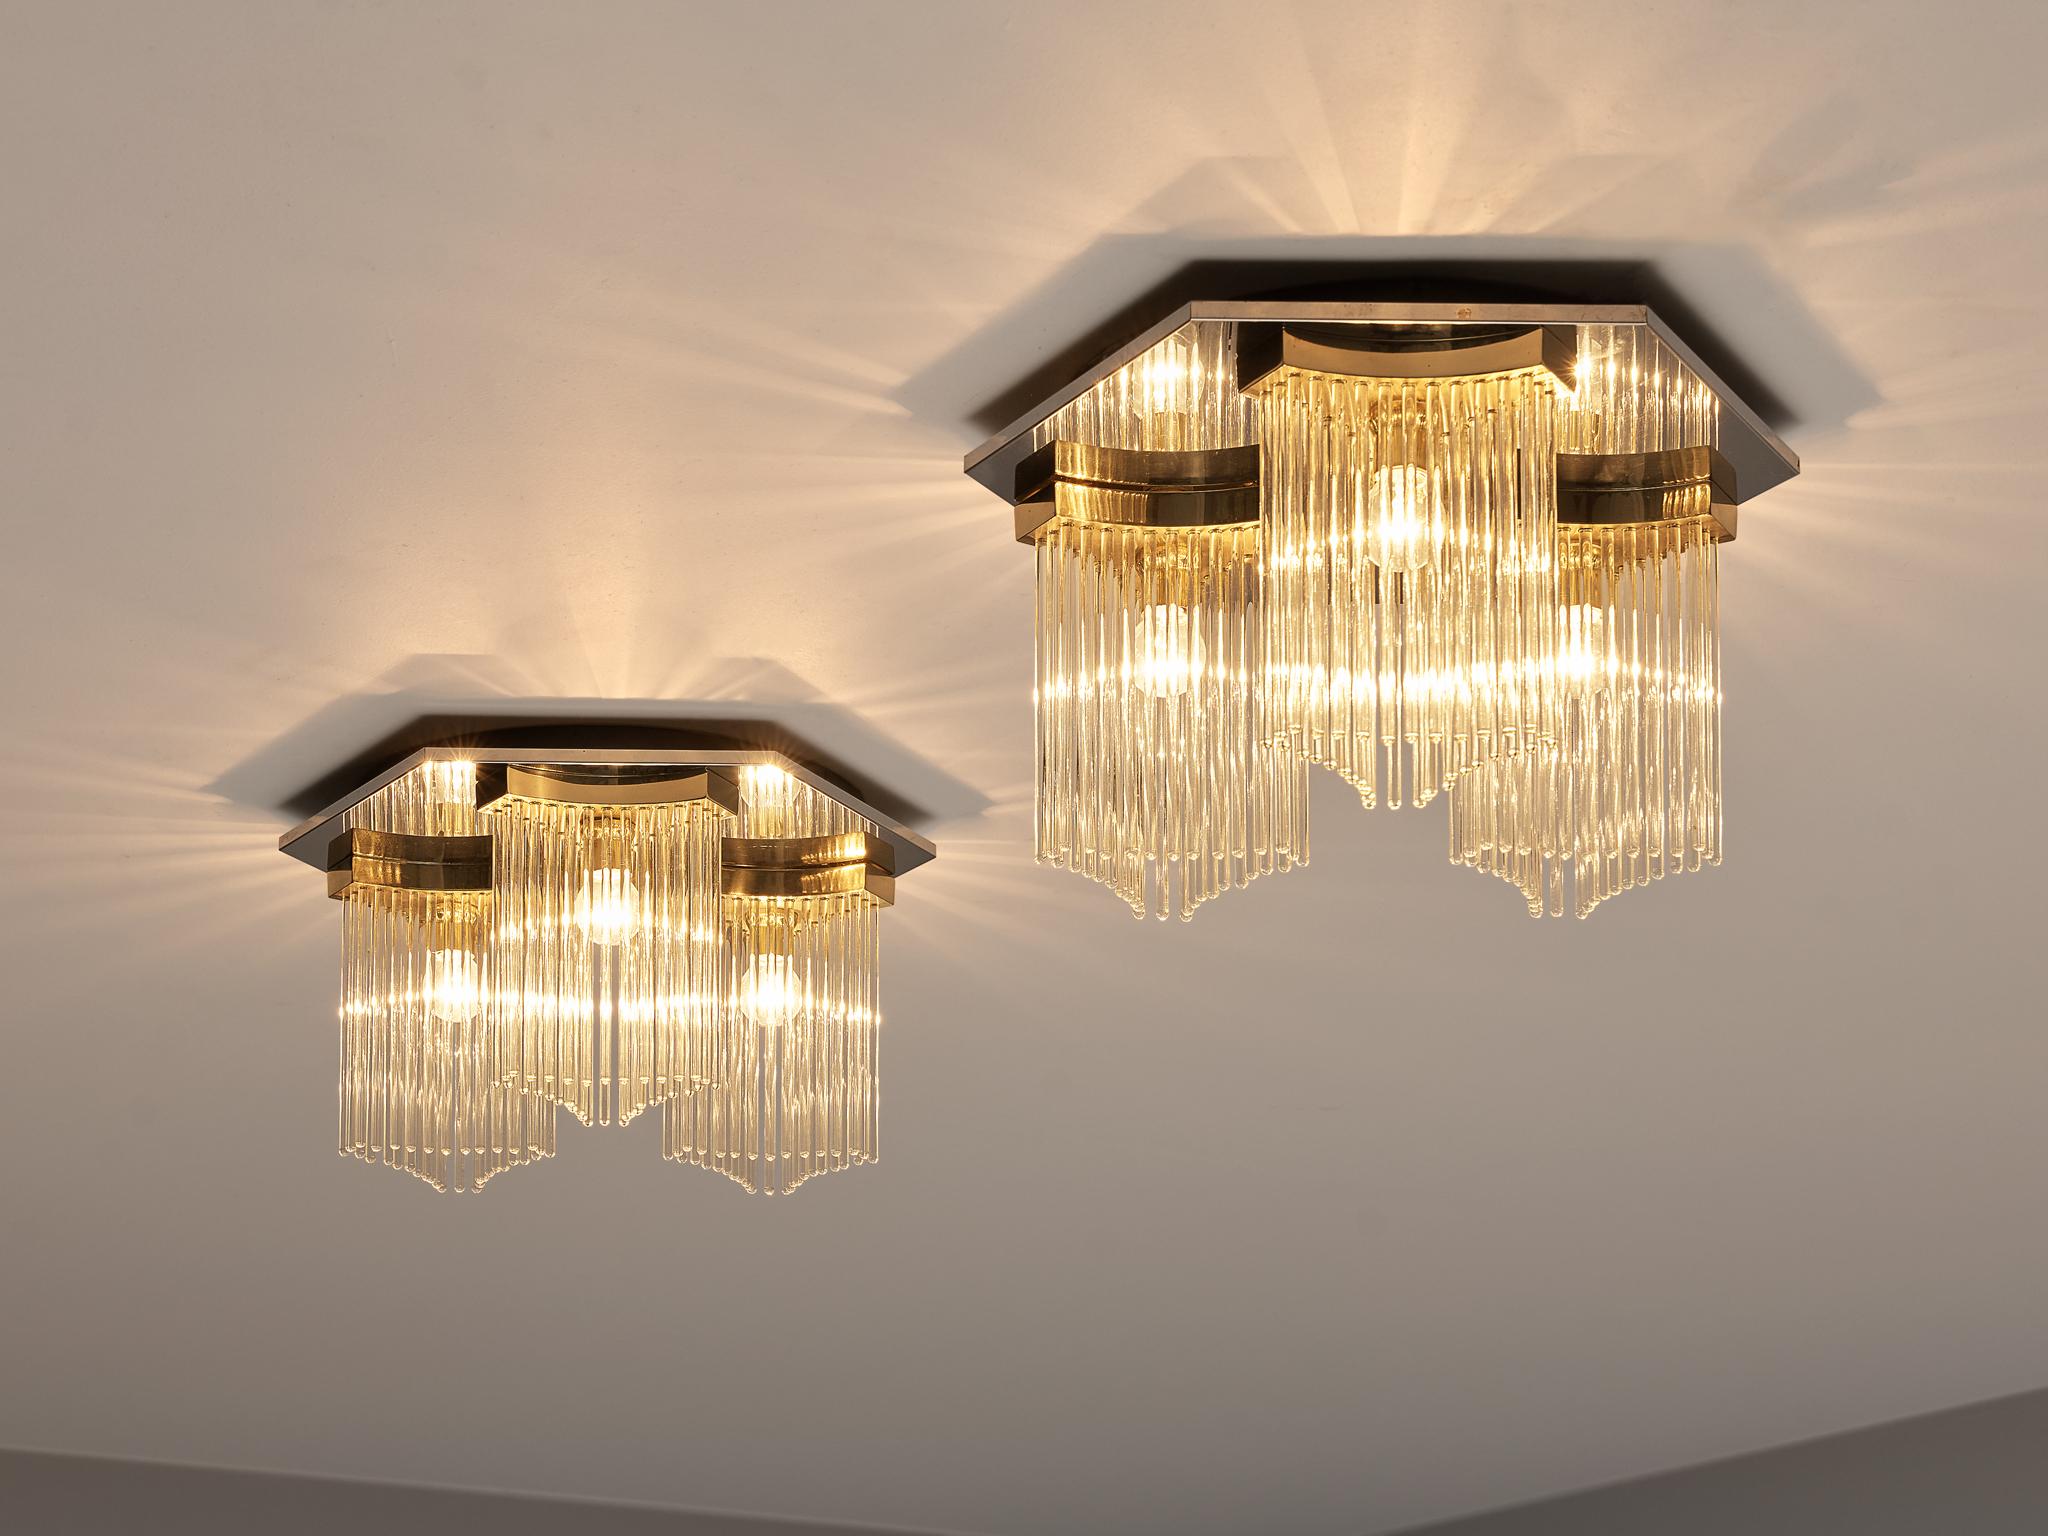 Gaetano Sciolari ceiling lights, glass, metal, Europe, 1980s

Stunning ceiling lights designed by Gaetano Sciolari in the 1980s. On a polygonal ceiling fixture are three light bulbs adjusted. These are surrounded by long glass prisms arranged by